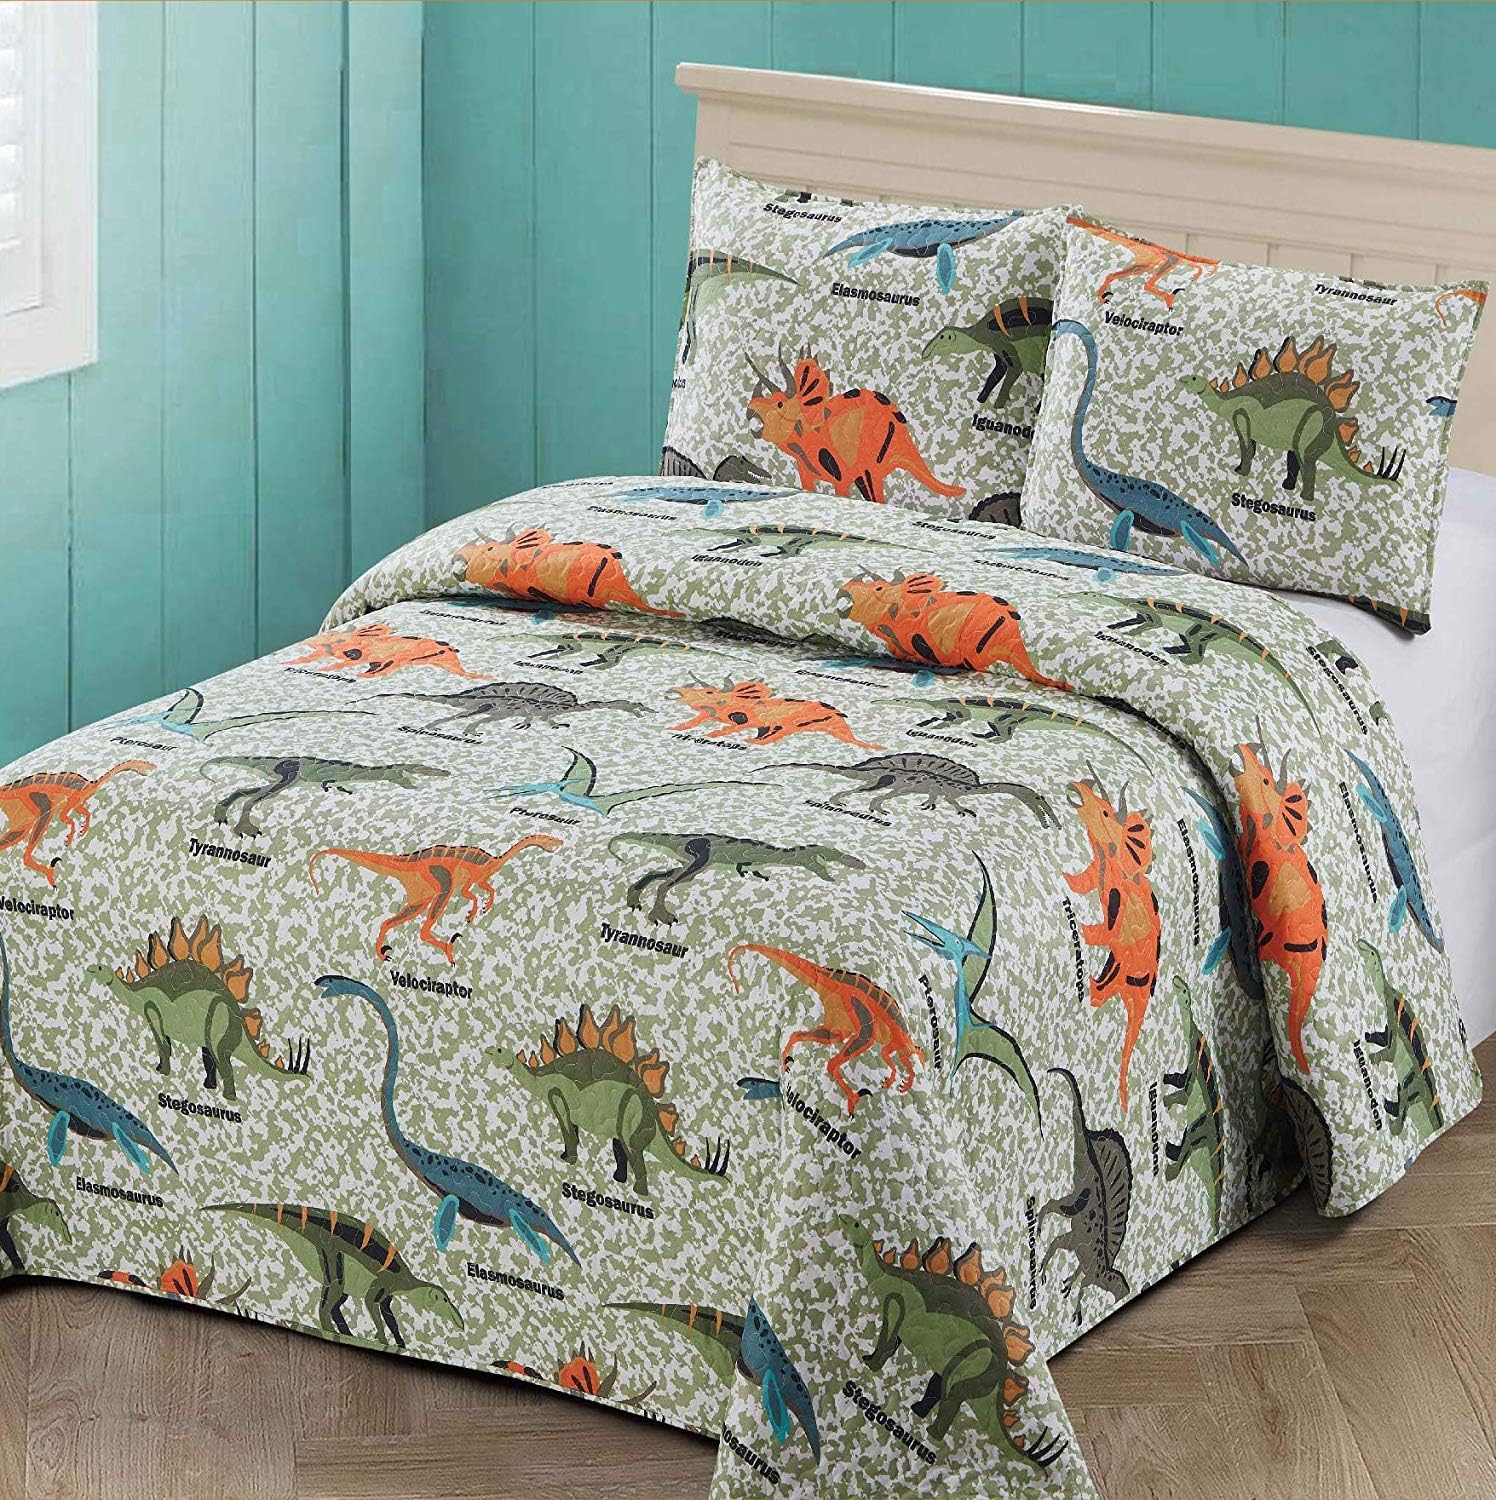 Smart Linen Kids Toddlers Boys, What Size Is A Twin Bedspread